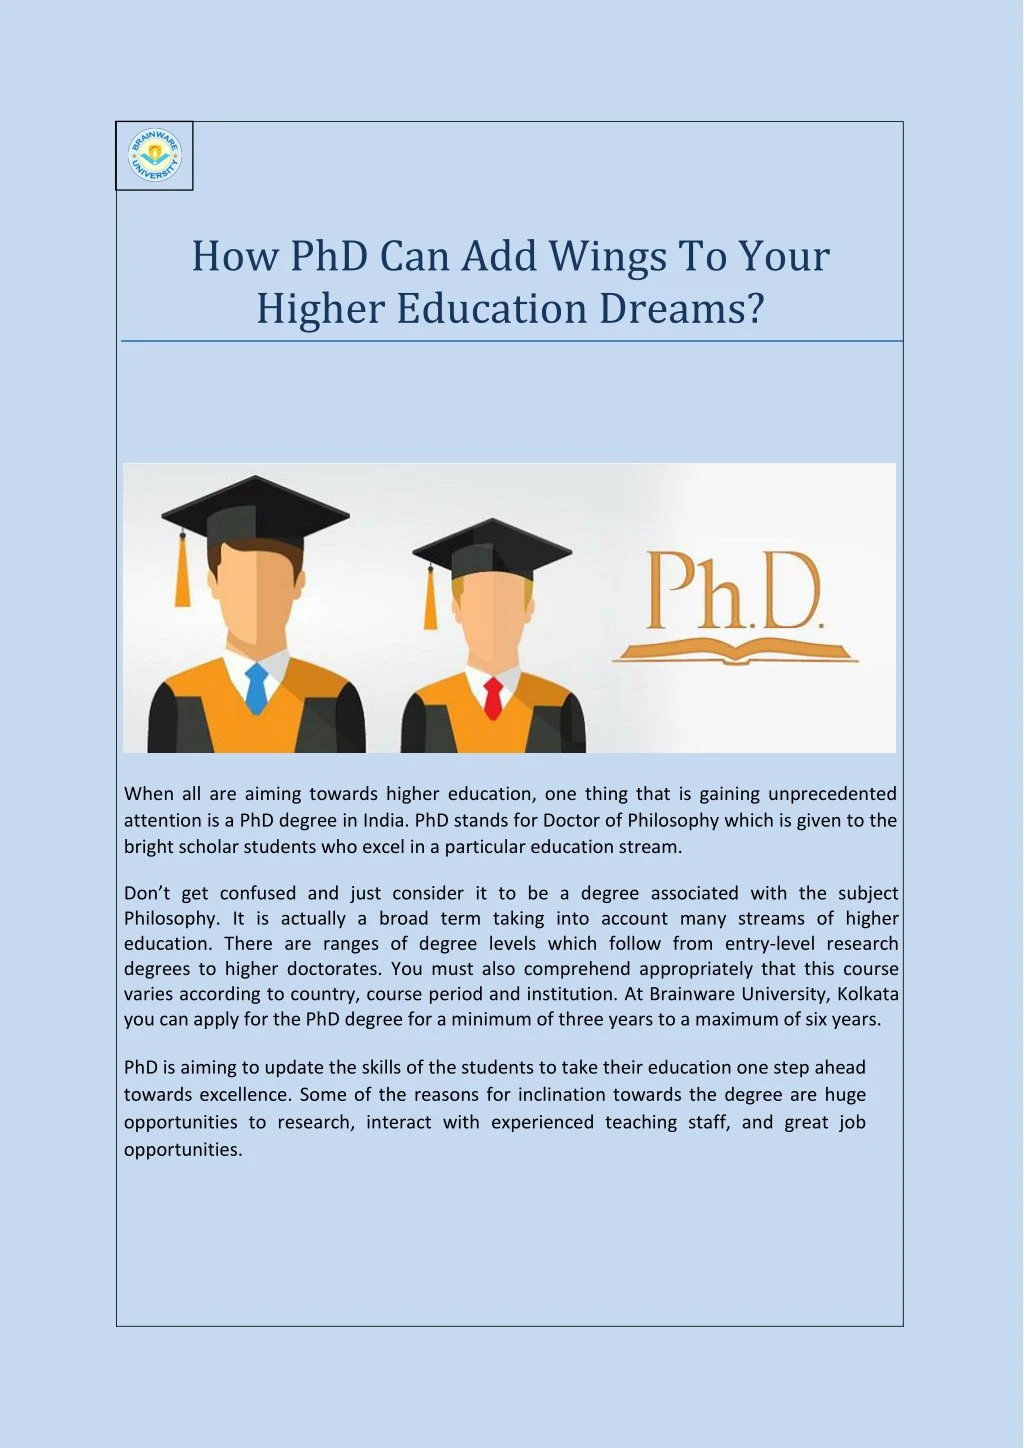 how phd can add wings to your higher education